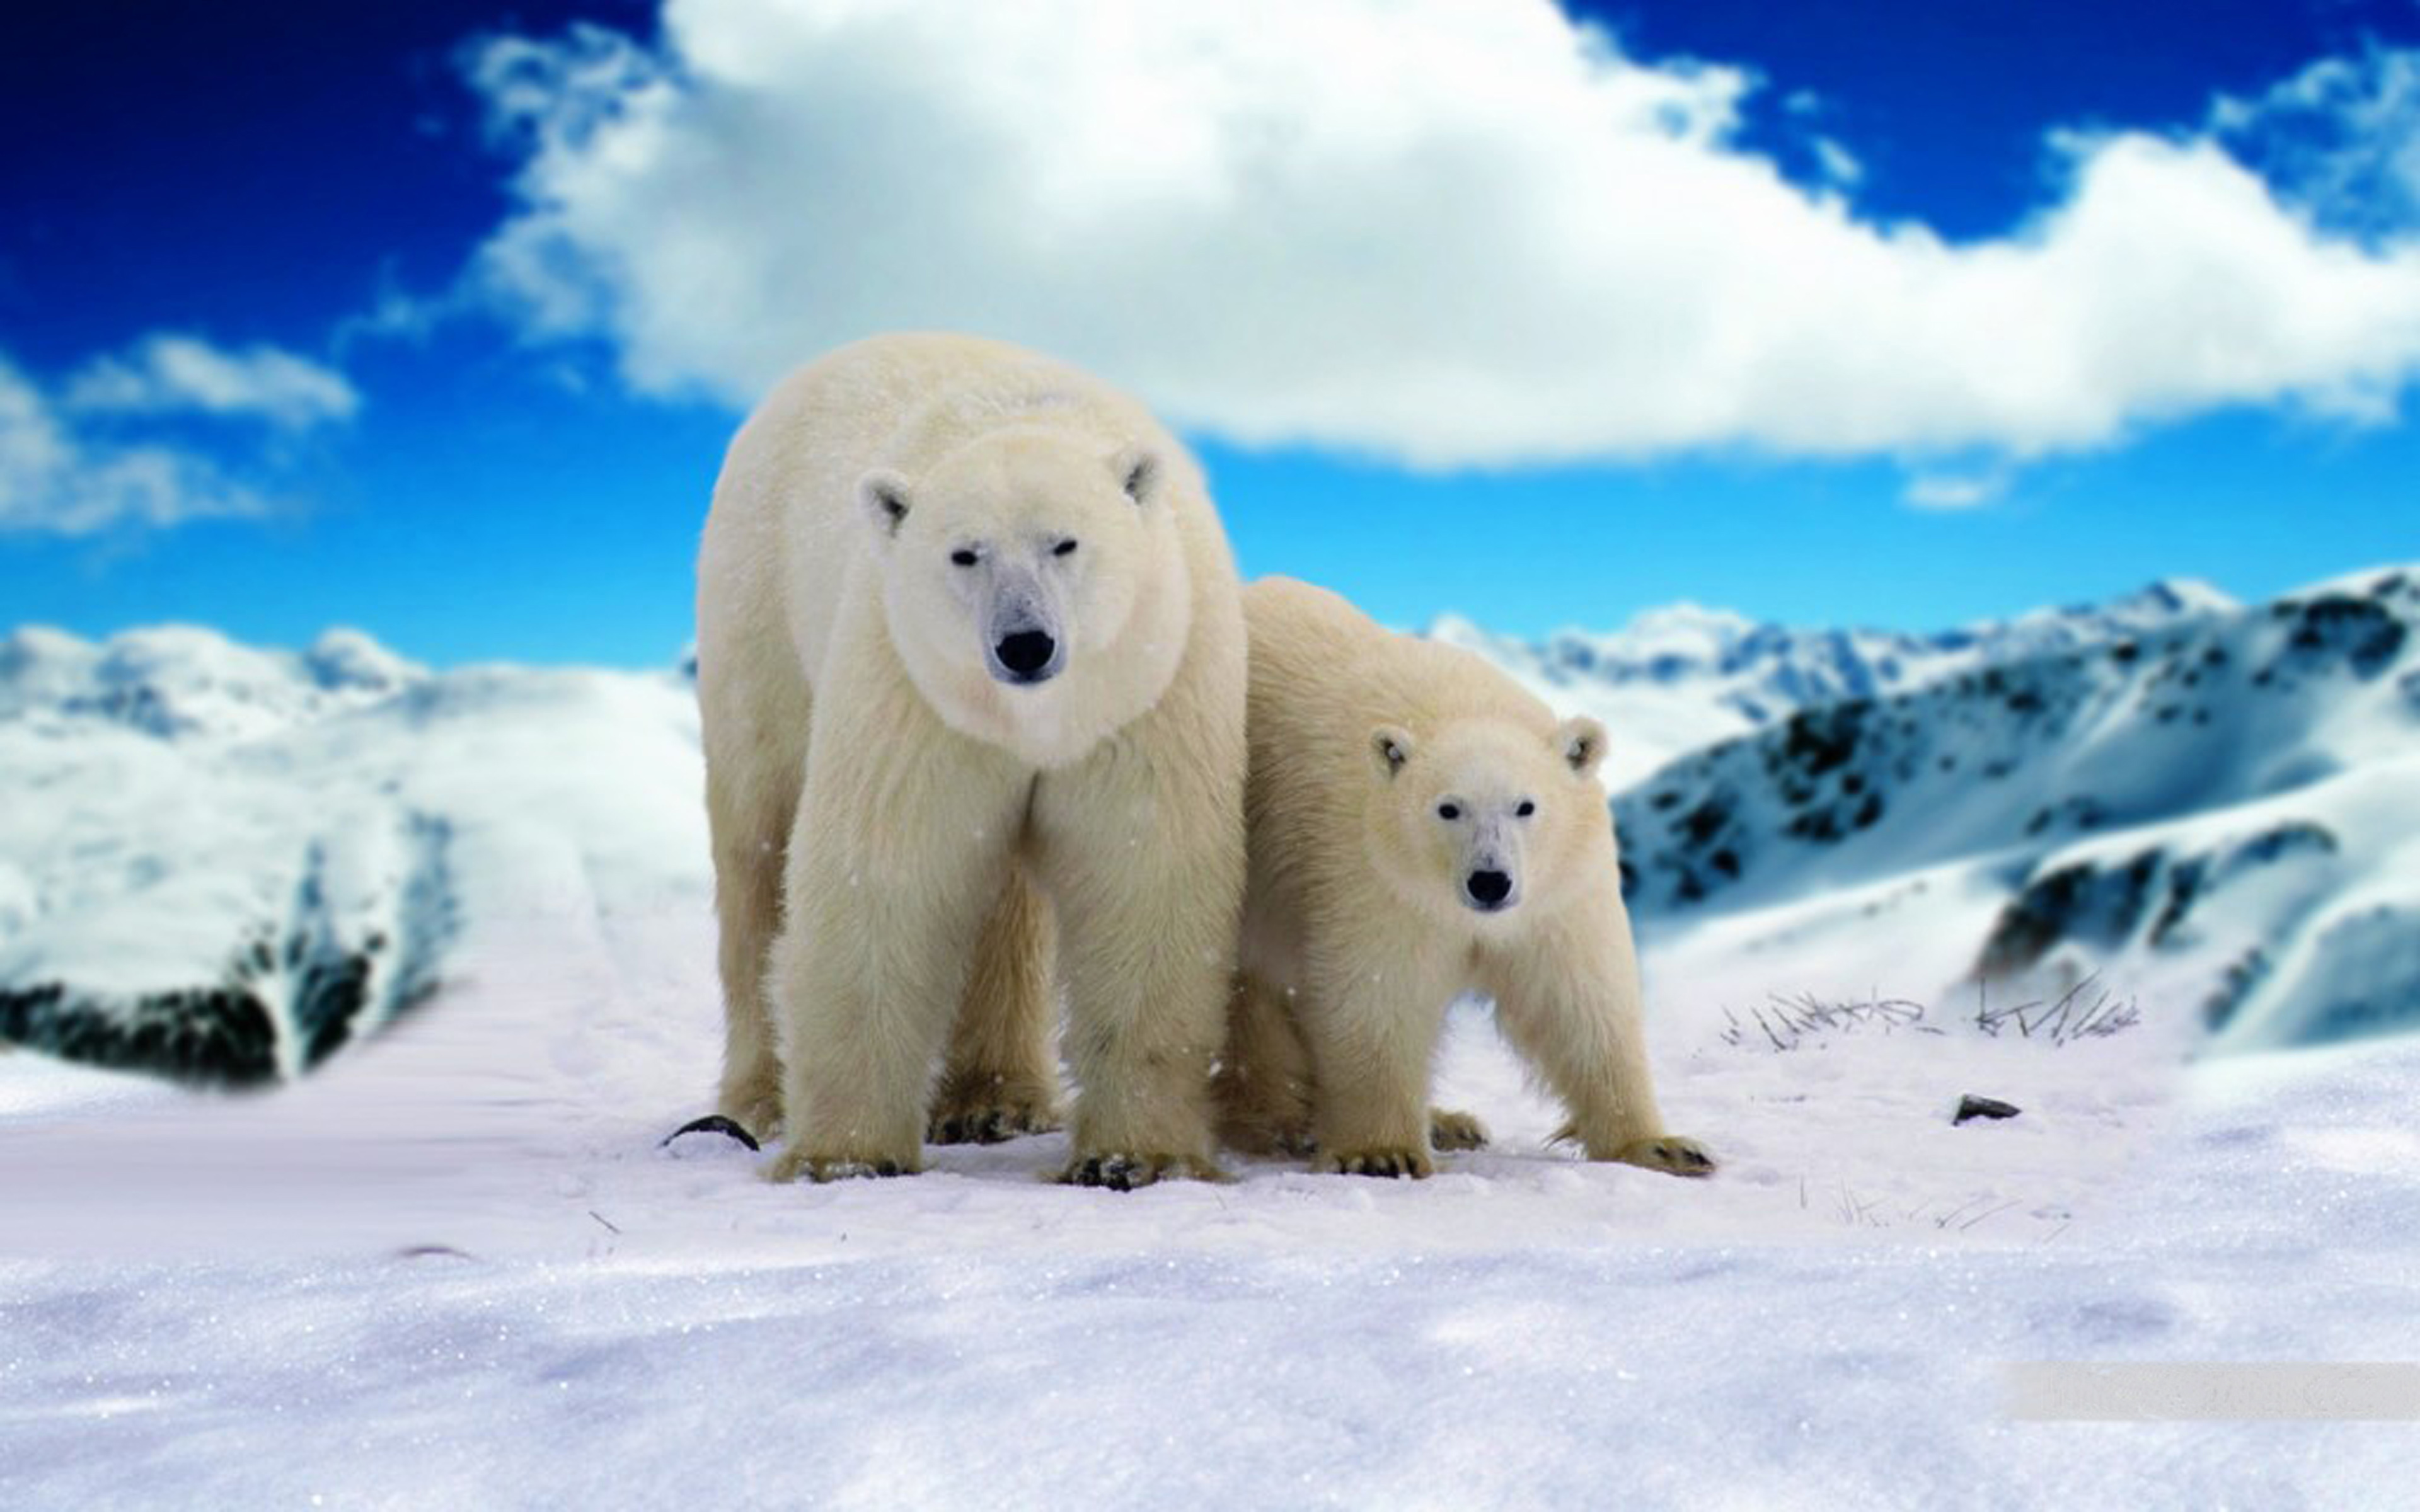 Adult Polar Bear And Young Bear Hd Wallpapers For Mobile Phones And